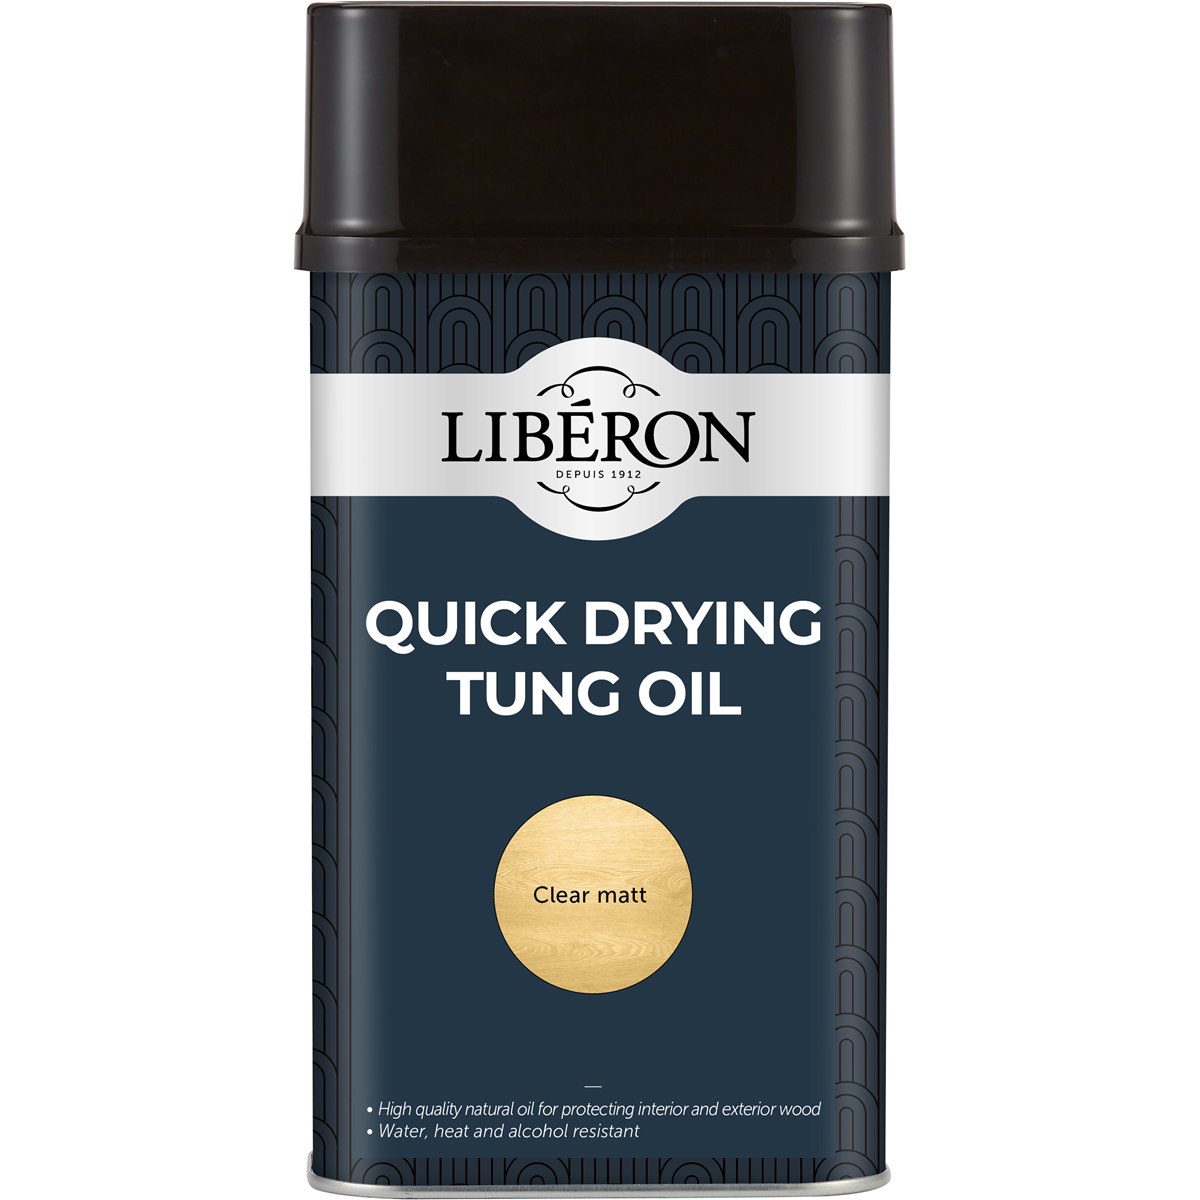 Liberon Quick Drying Tung Oil 1 Litre